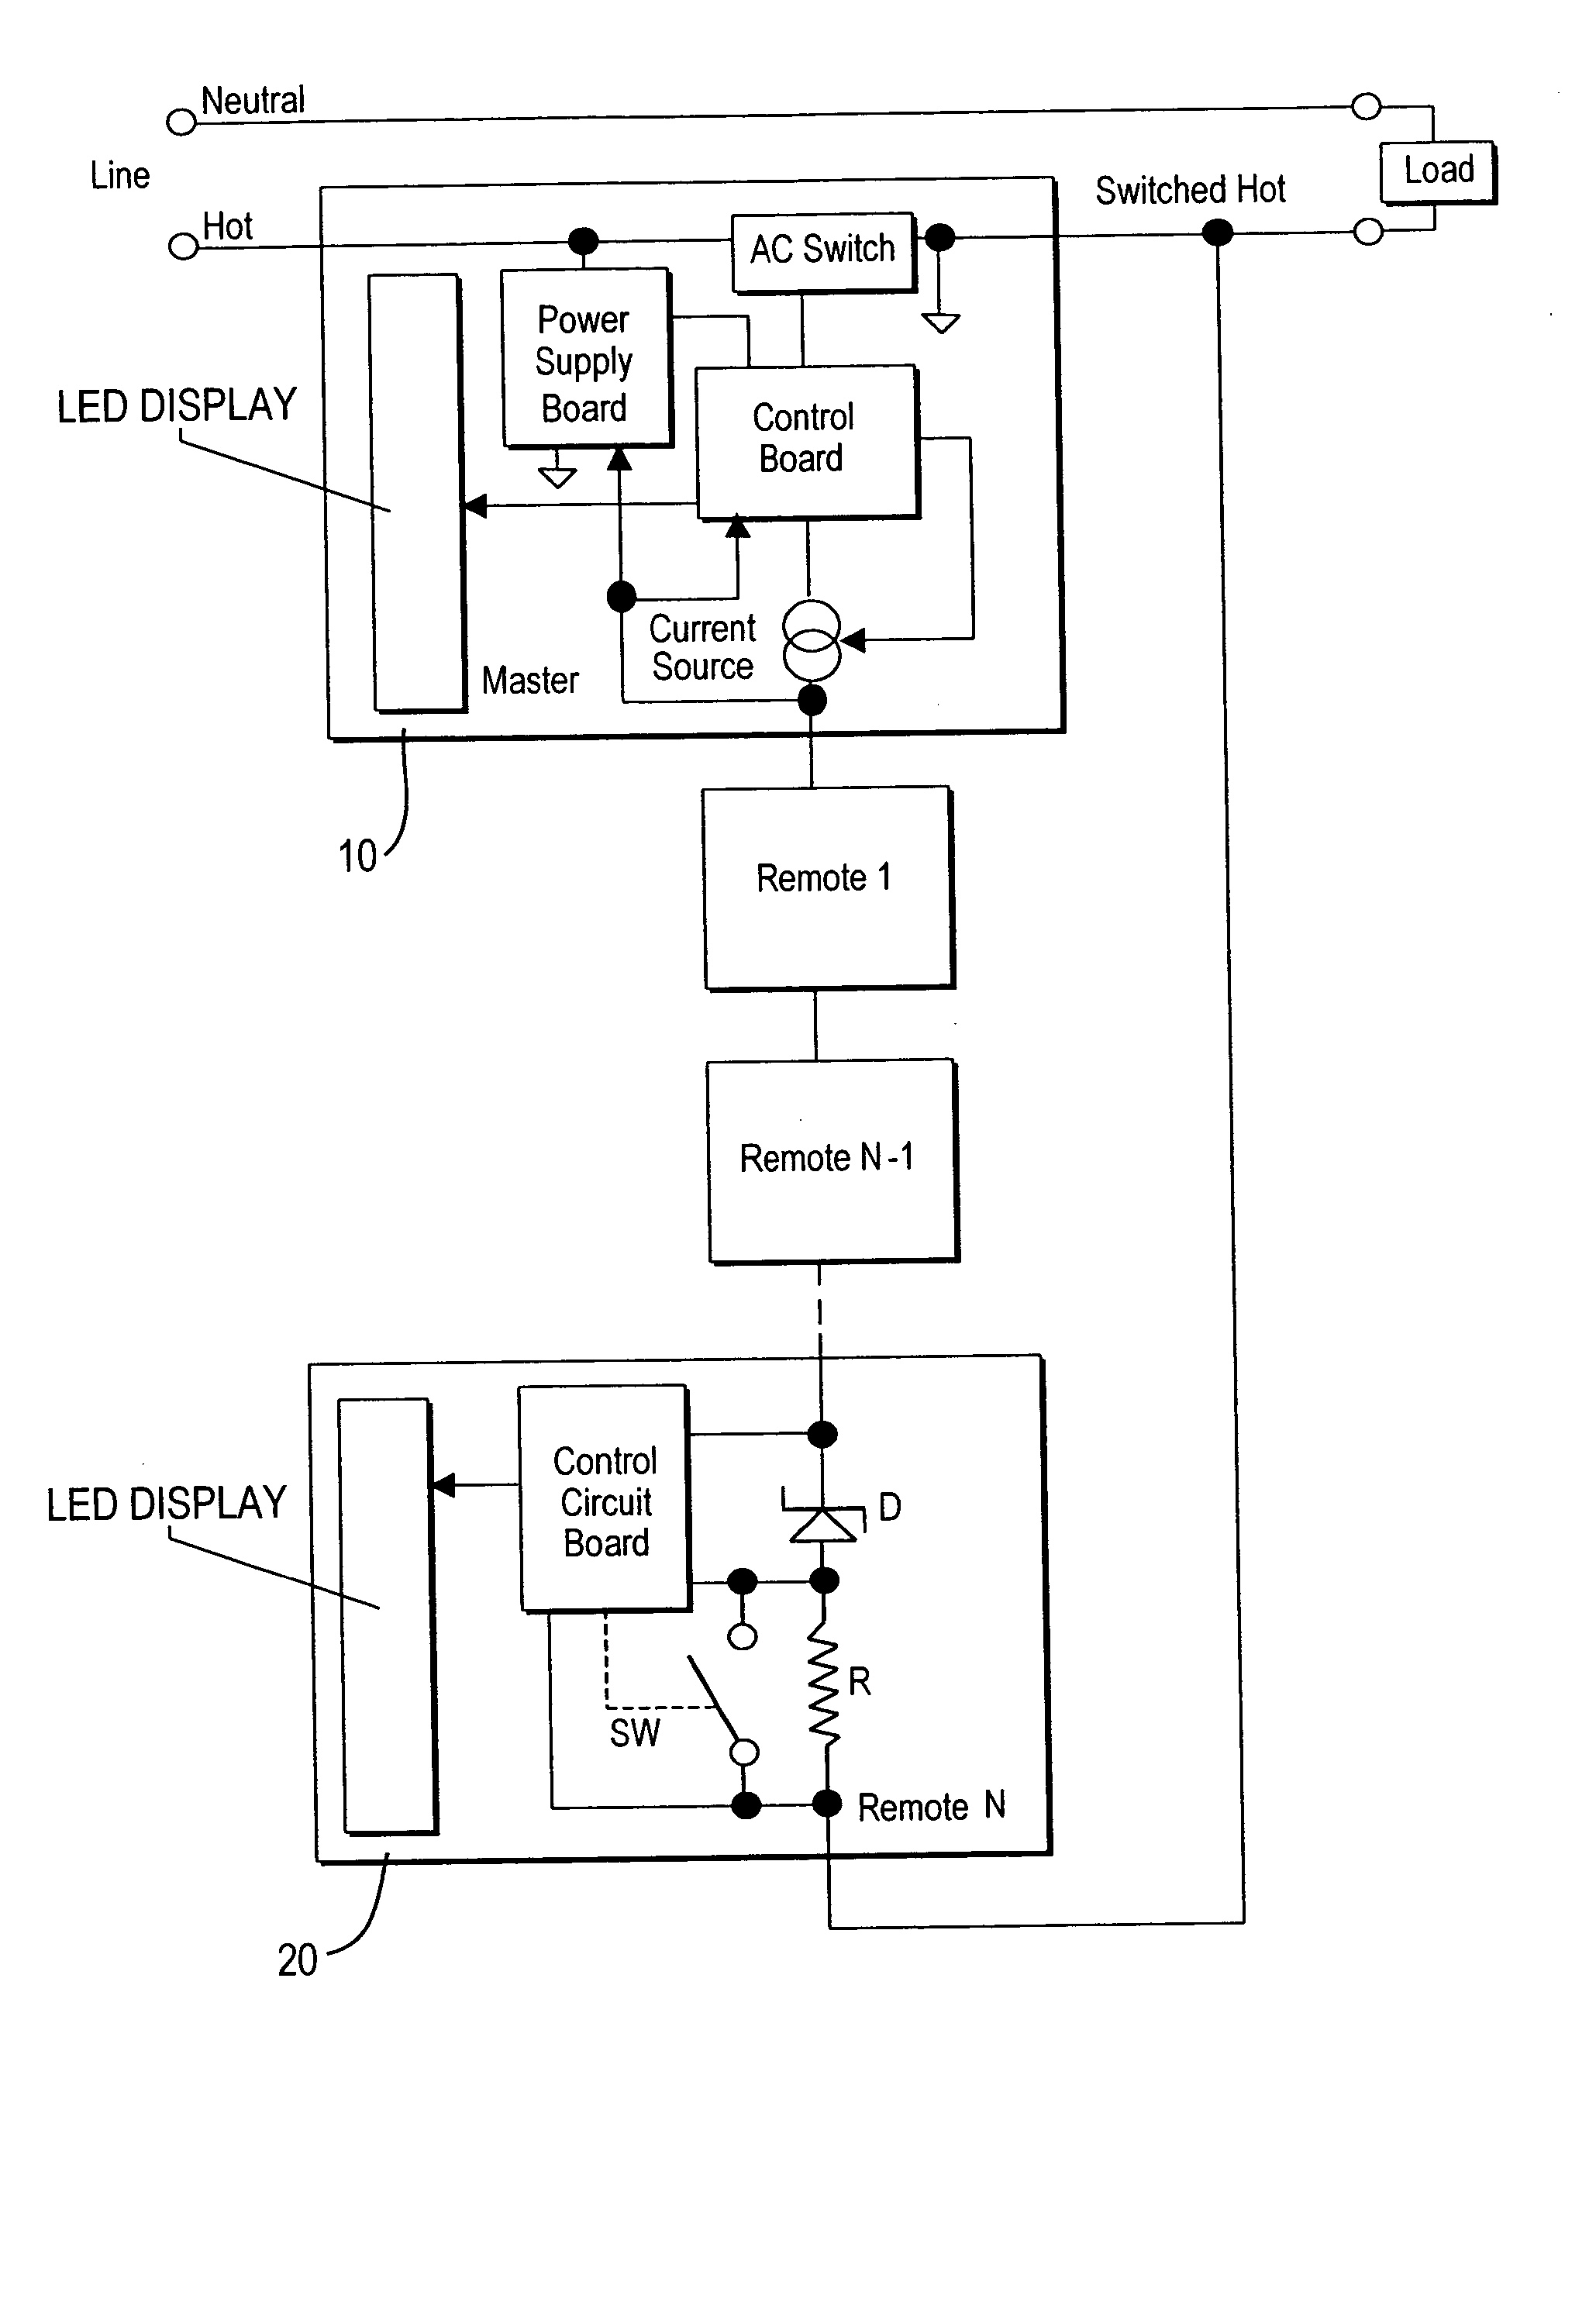 Dimmer control system with two-way master-remote communication